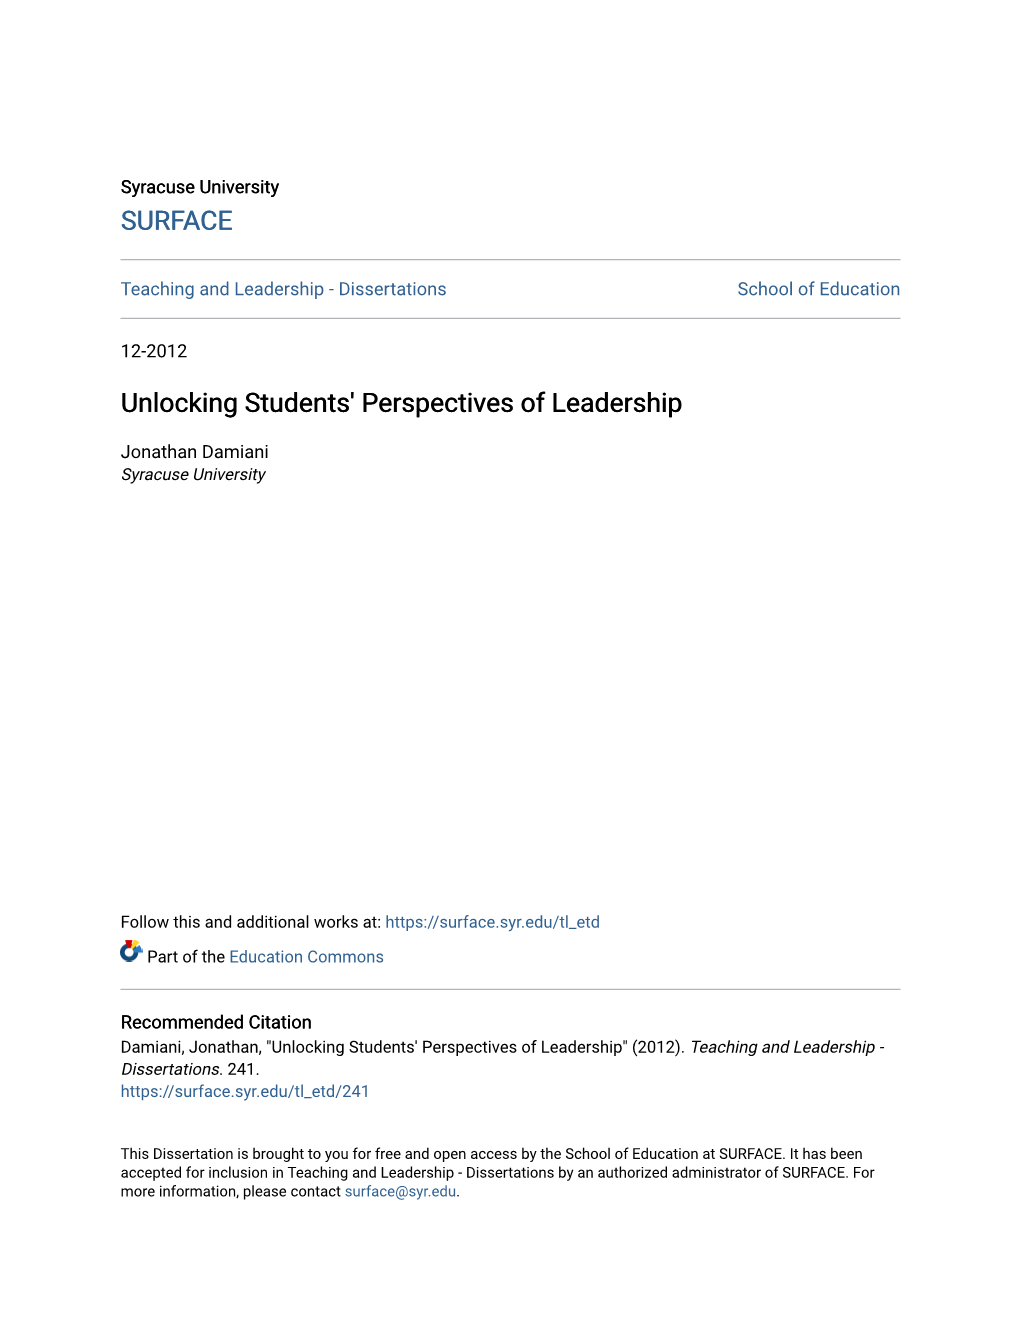 Unlocking Students' Perspectives of Leadership